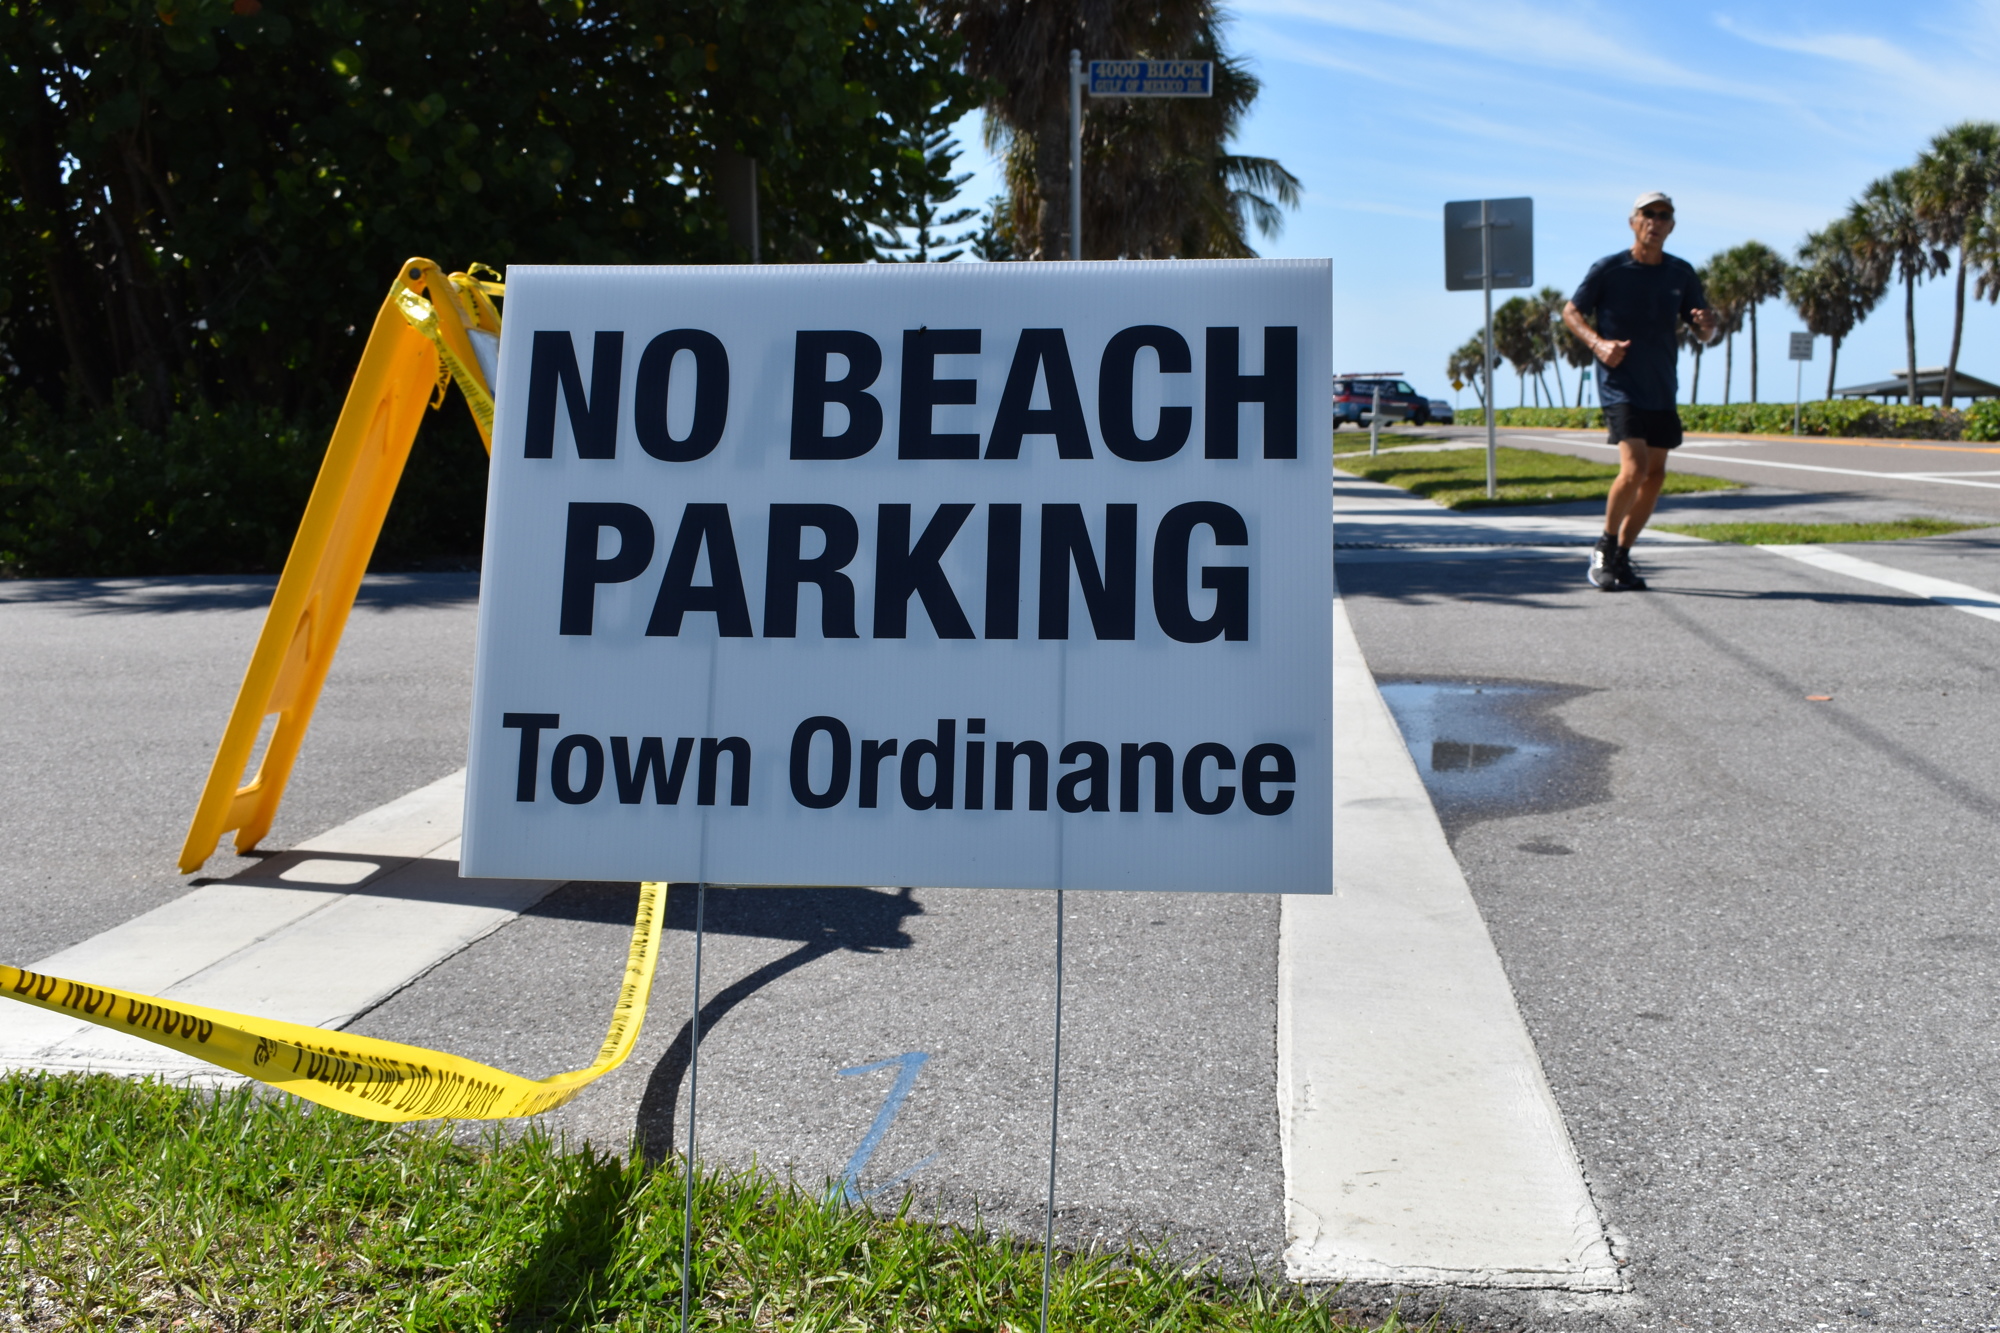 The town of Longboat Key's 12 public beach access points reopened at the start of June, but then closed again on June 30.